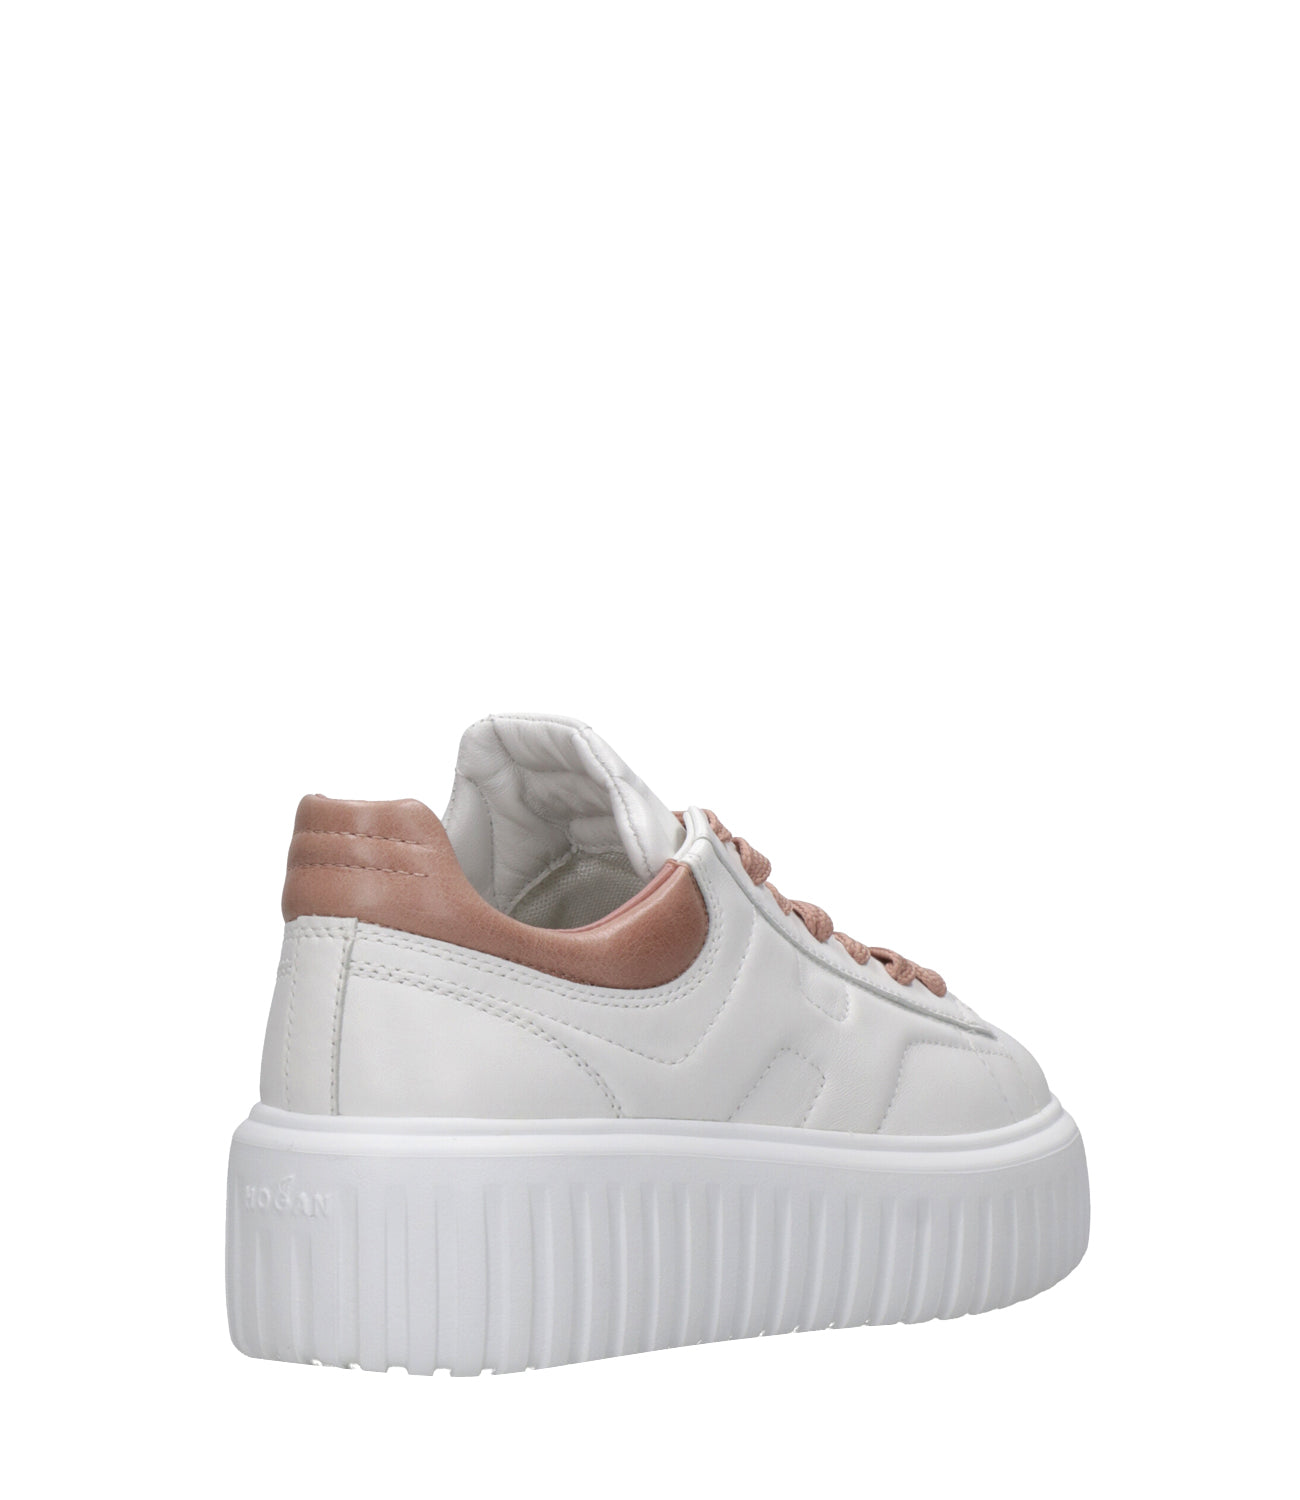 Hogan | Sneakers H-Stripes Lace-up White and Leather